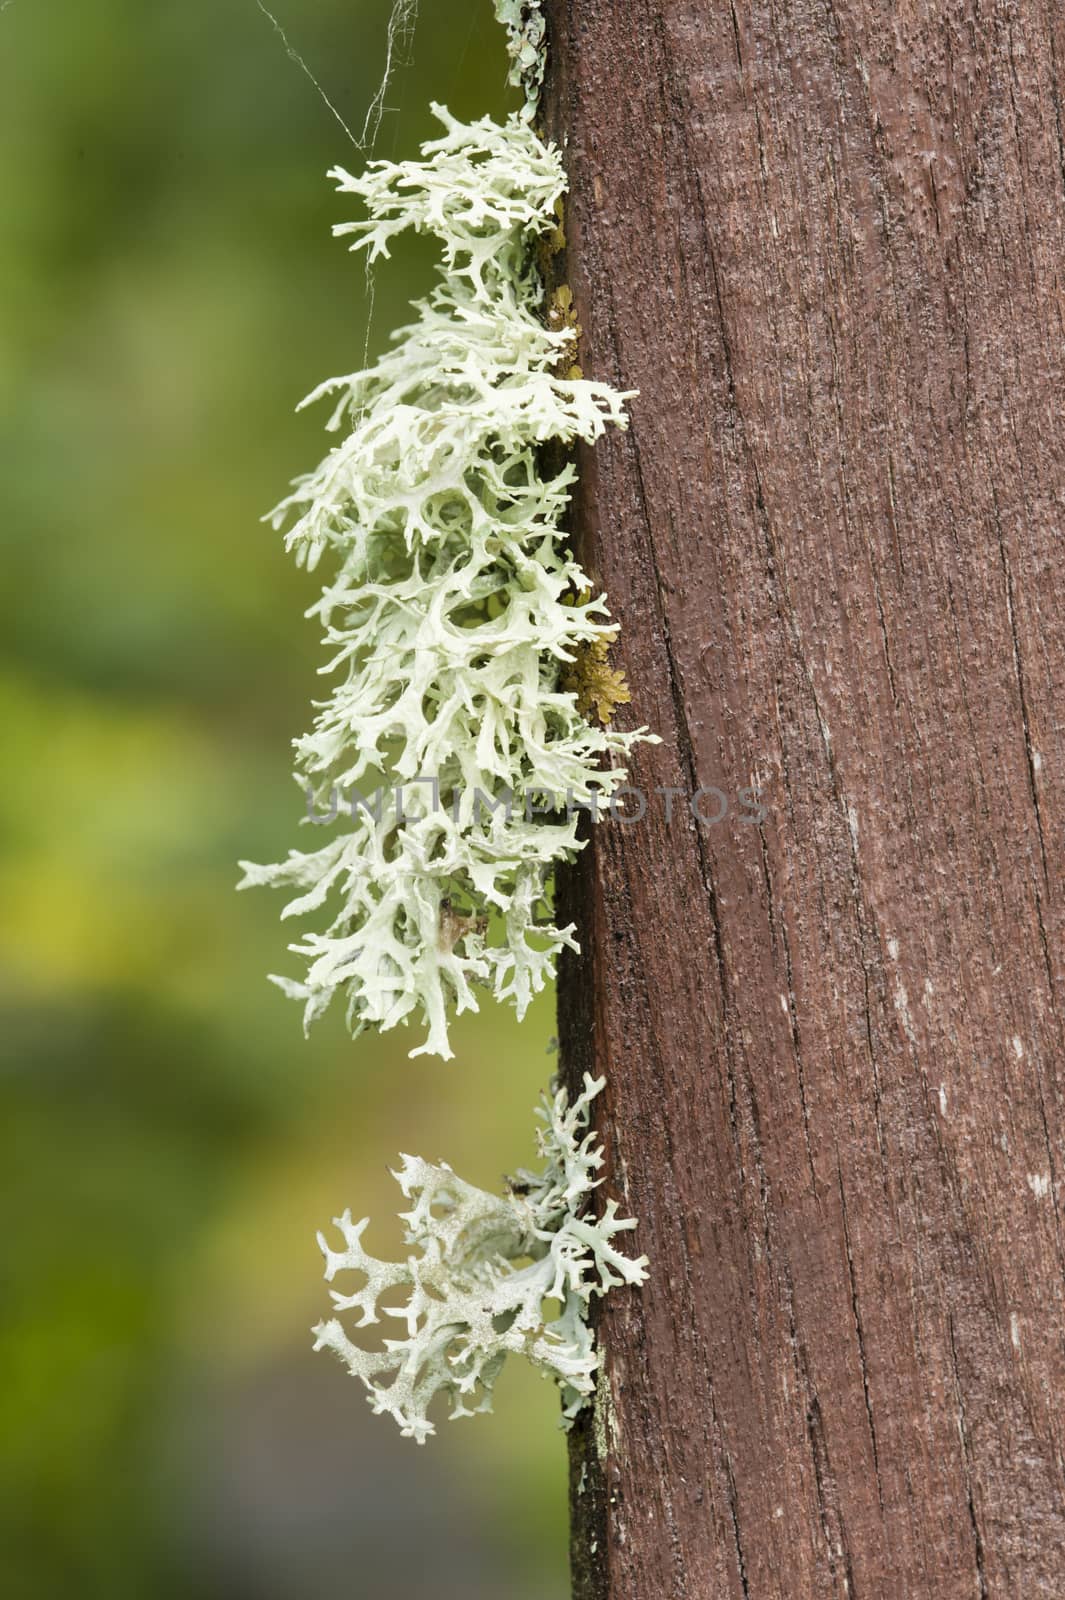 Lichen organisms growing on wood and stone